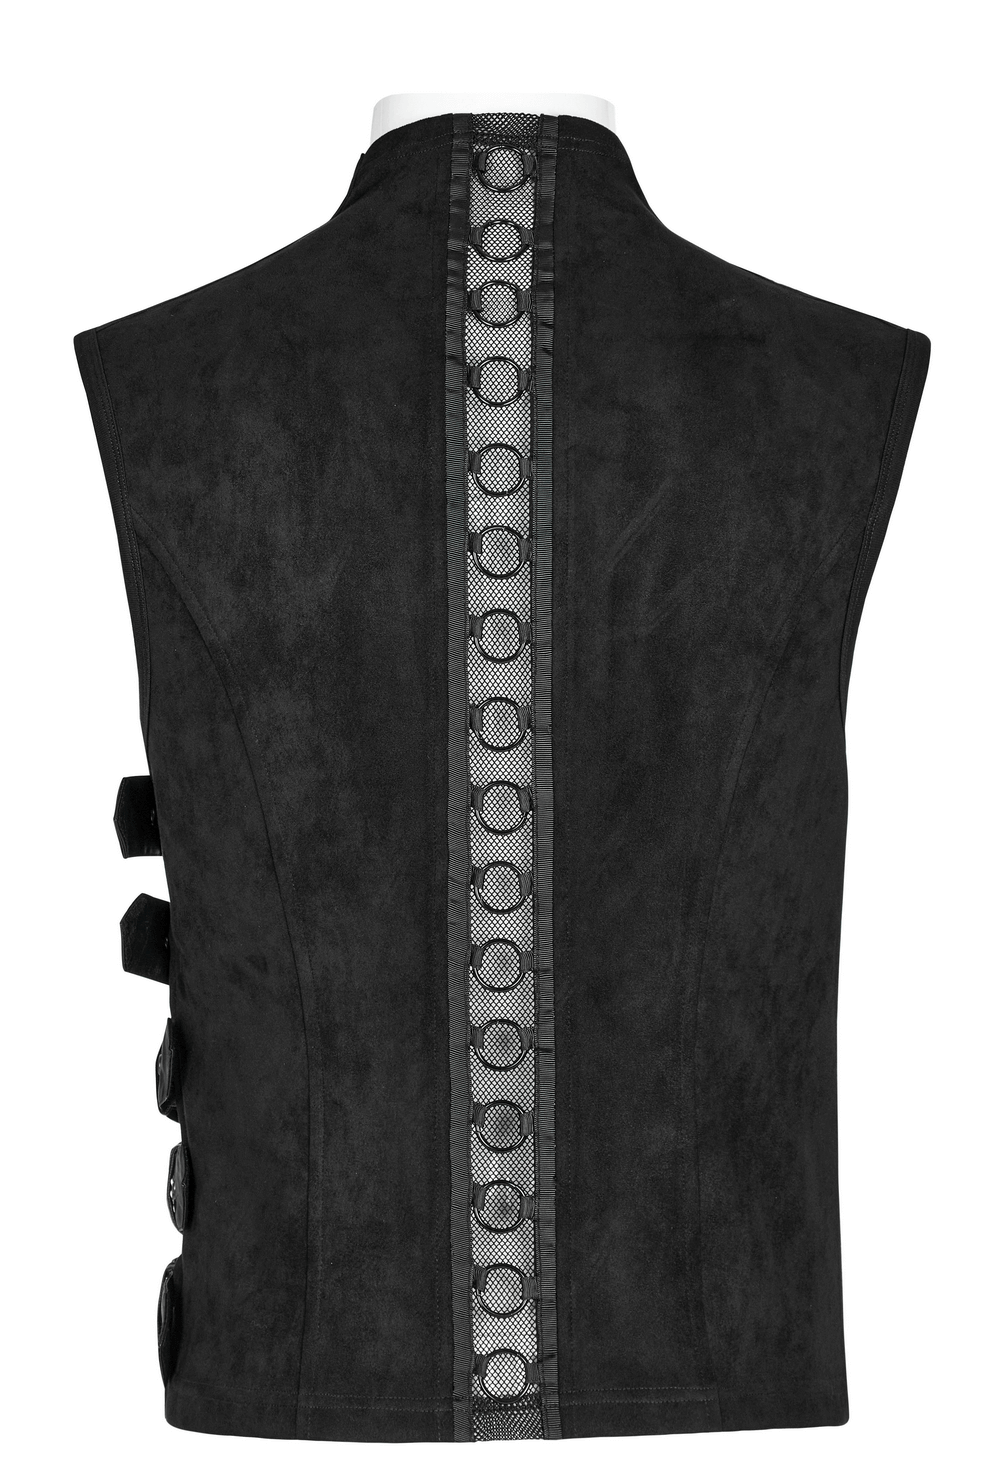 Sexy Stylish Edgy Buckled Suede Punk Vest for Men